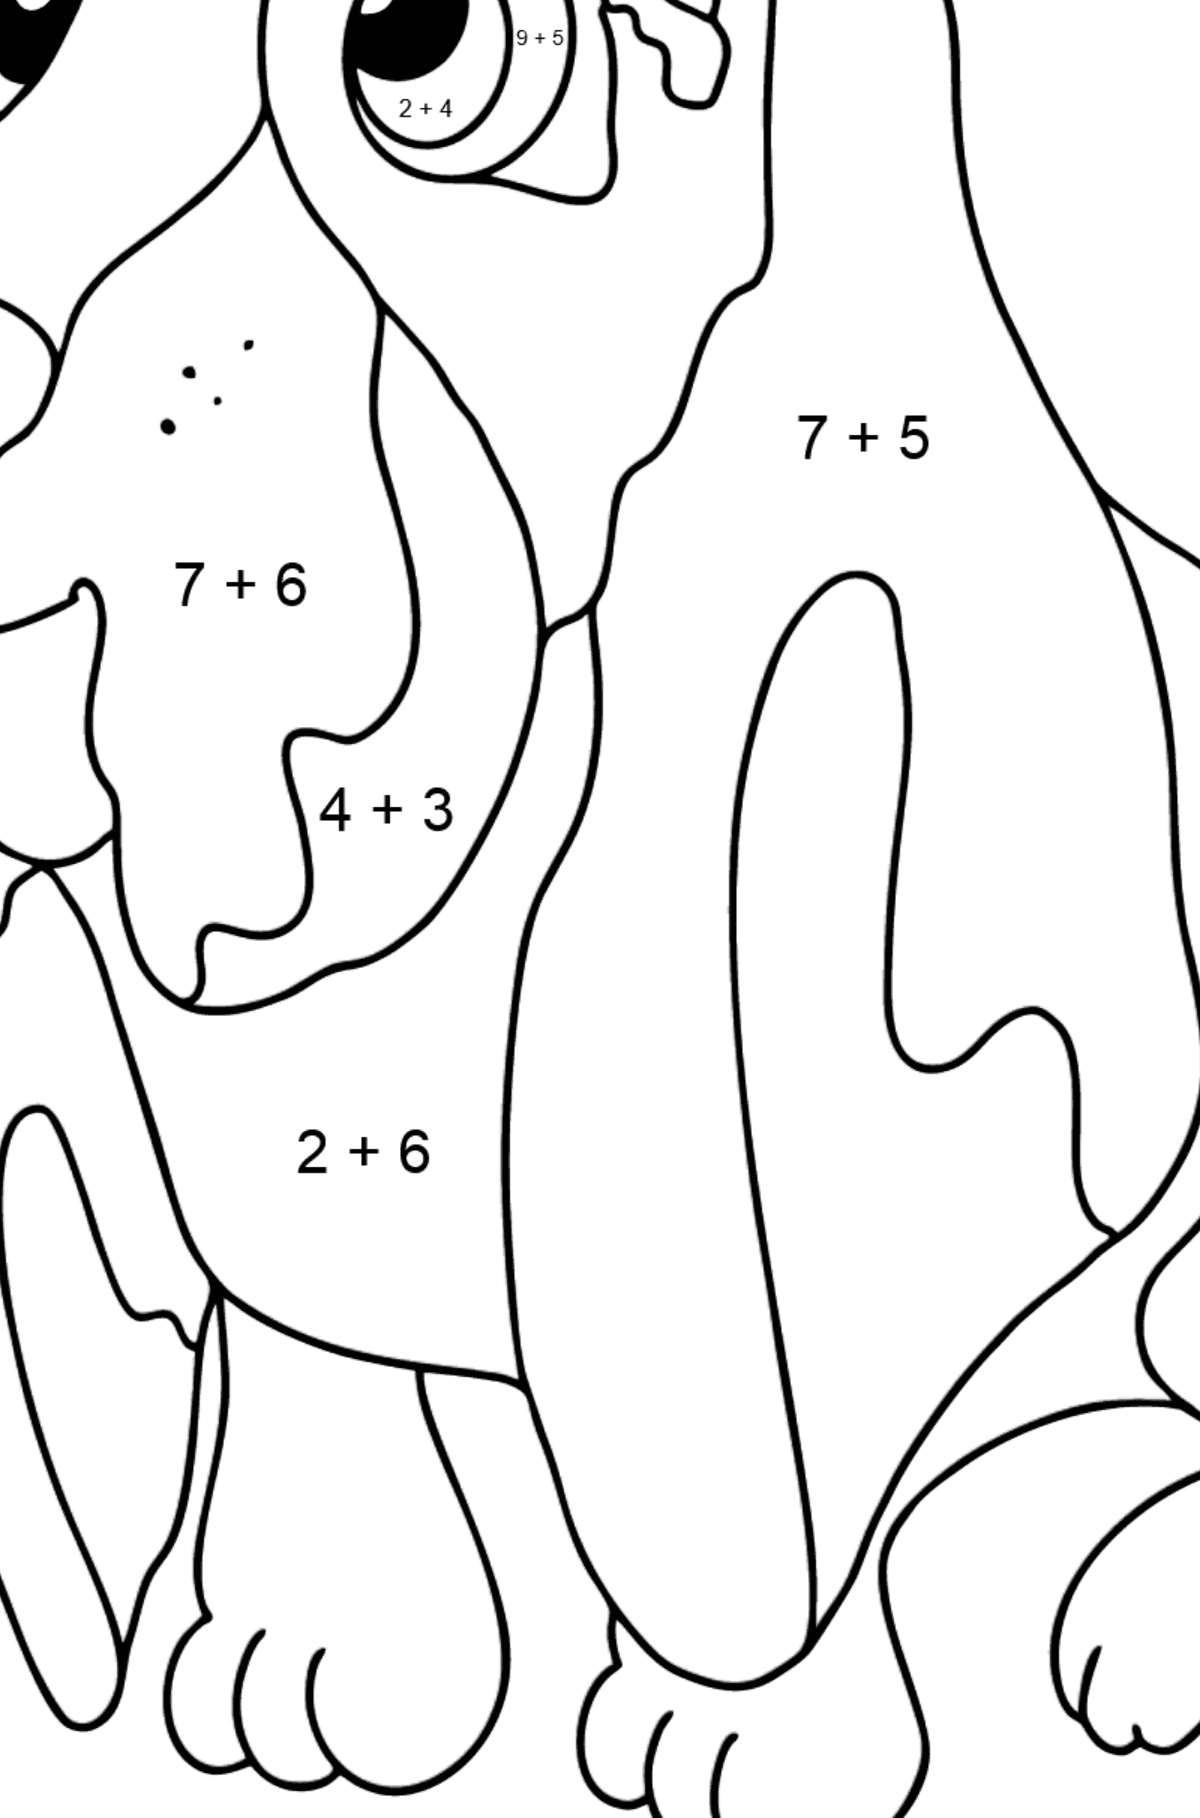 Coloring Page - A Dog is Sitting near a Bone - Math Coloring - Addition for Kids